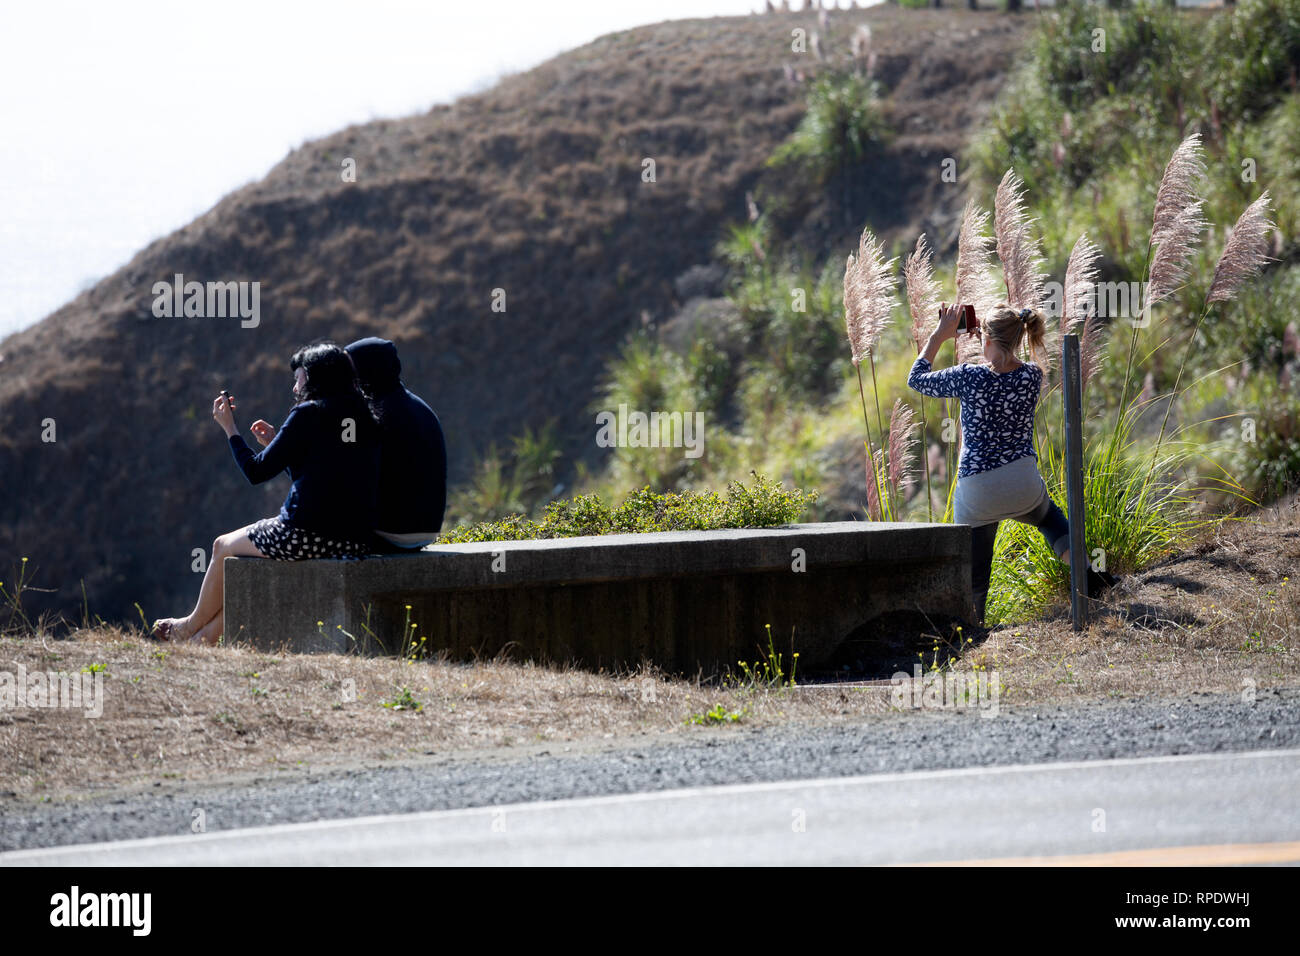 Three people on a road trip relaxing on State Route 1 (the Shoreline Highway), above Meyer Gulch, California, America Stock Photo